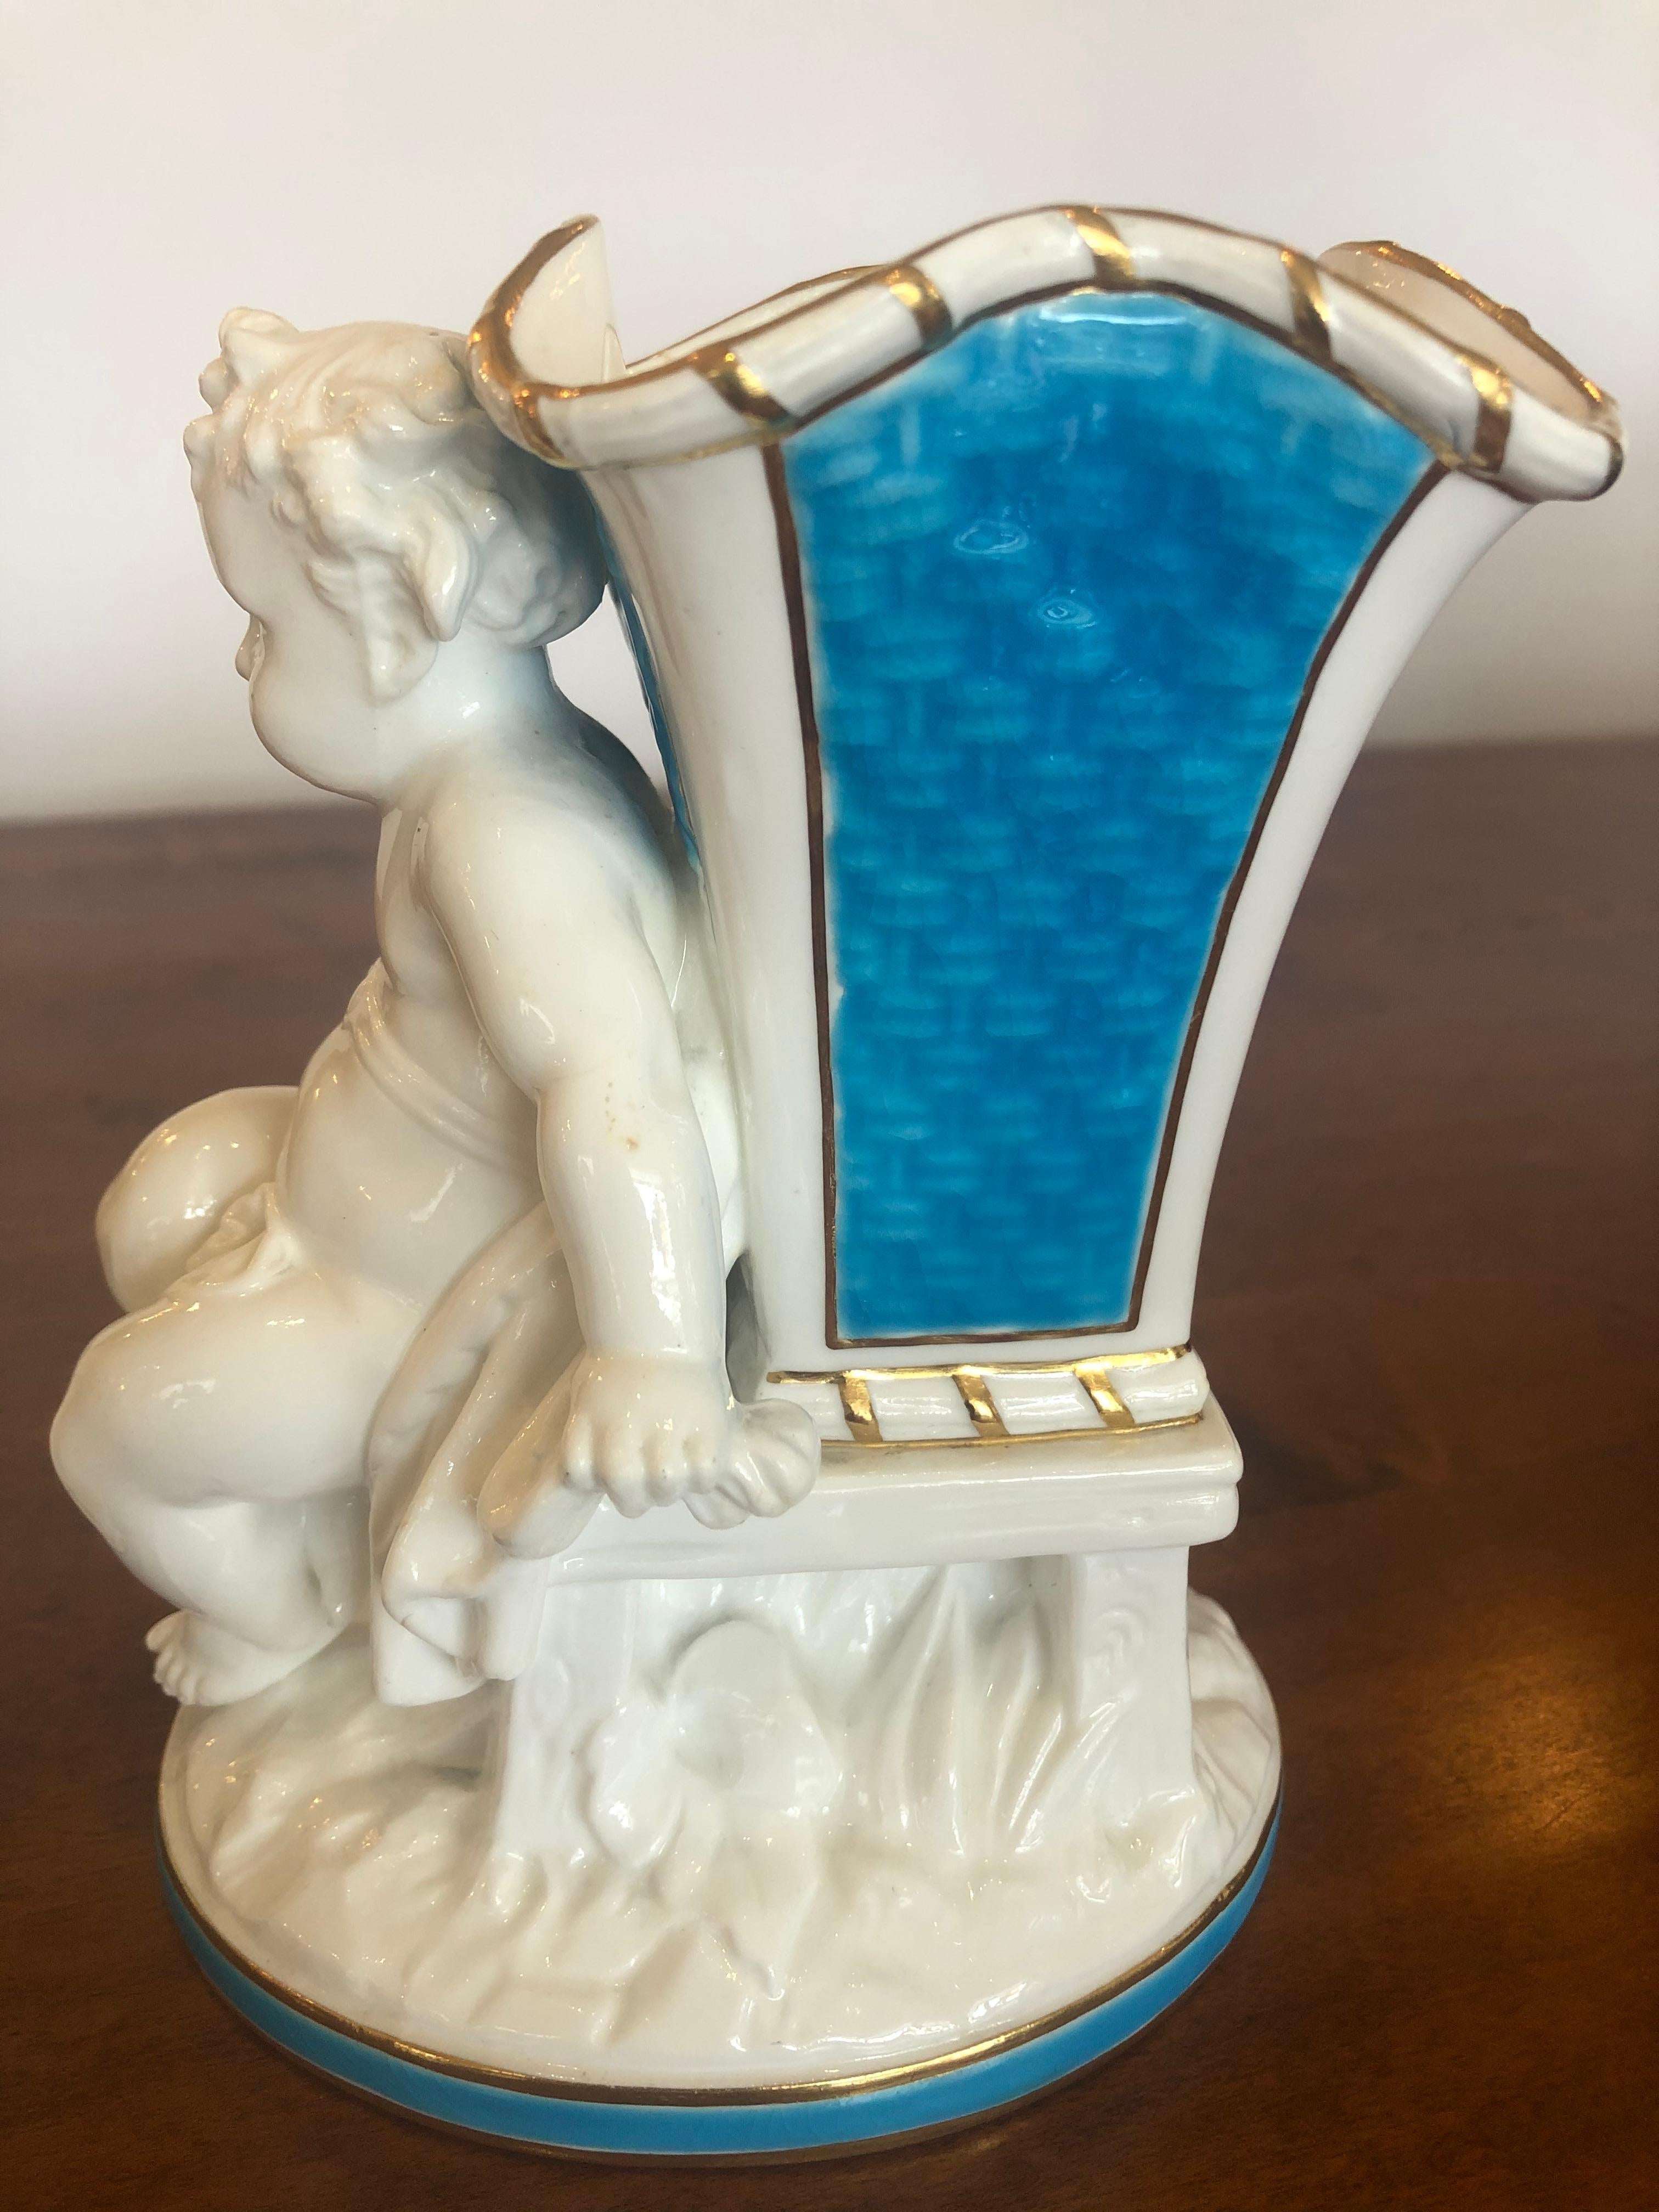 Superb Rare Pair of Cherub Minton Caldwell Tiffany Blue and White Spill Vases For Sale 9